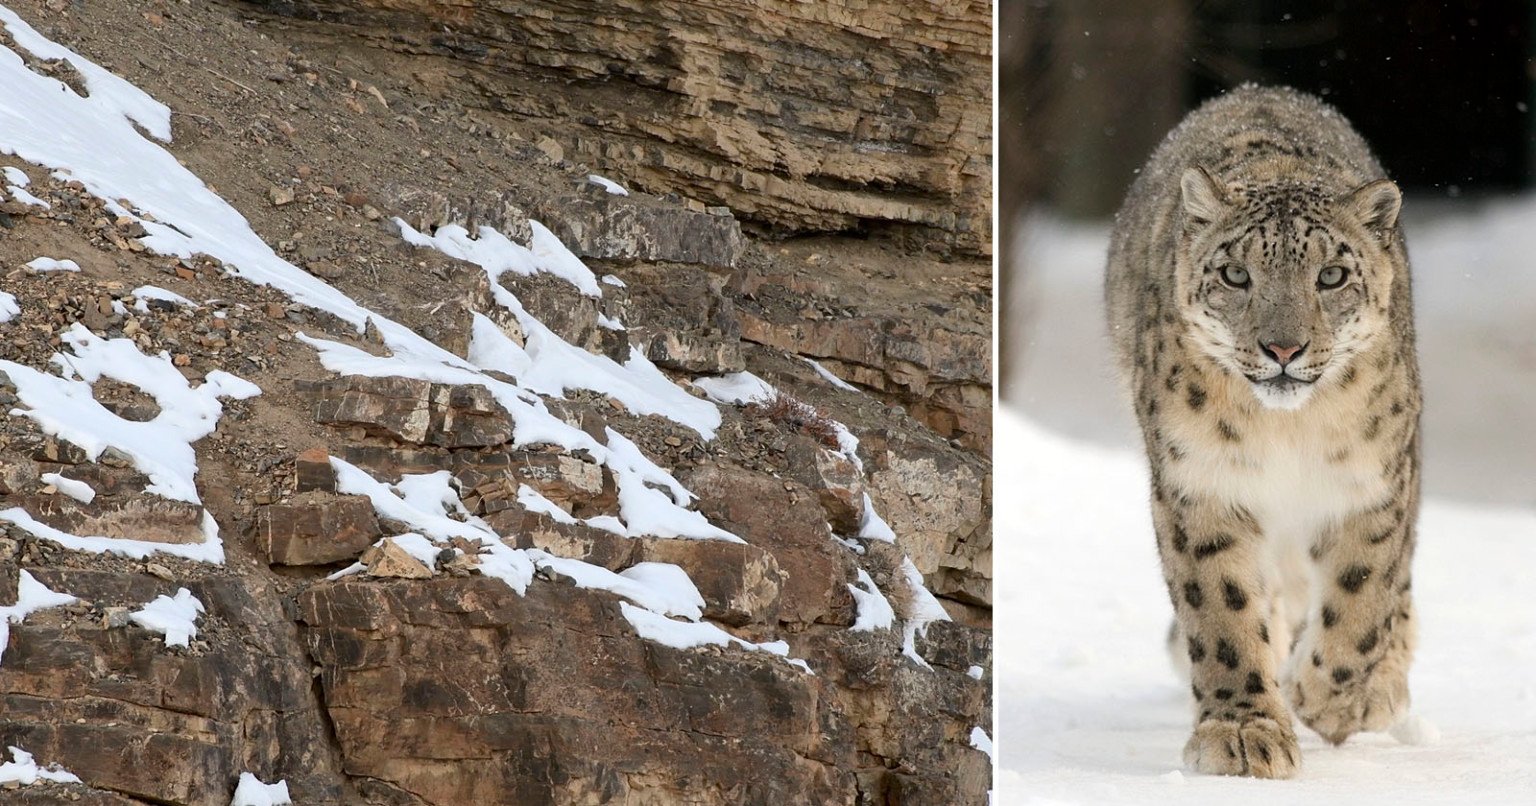 Can You Spot the Snow Leopards in These Photos? PetaPixel